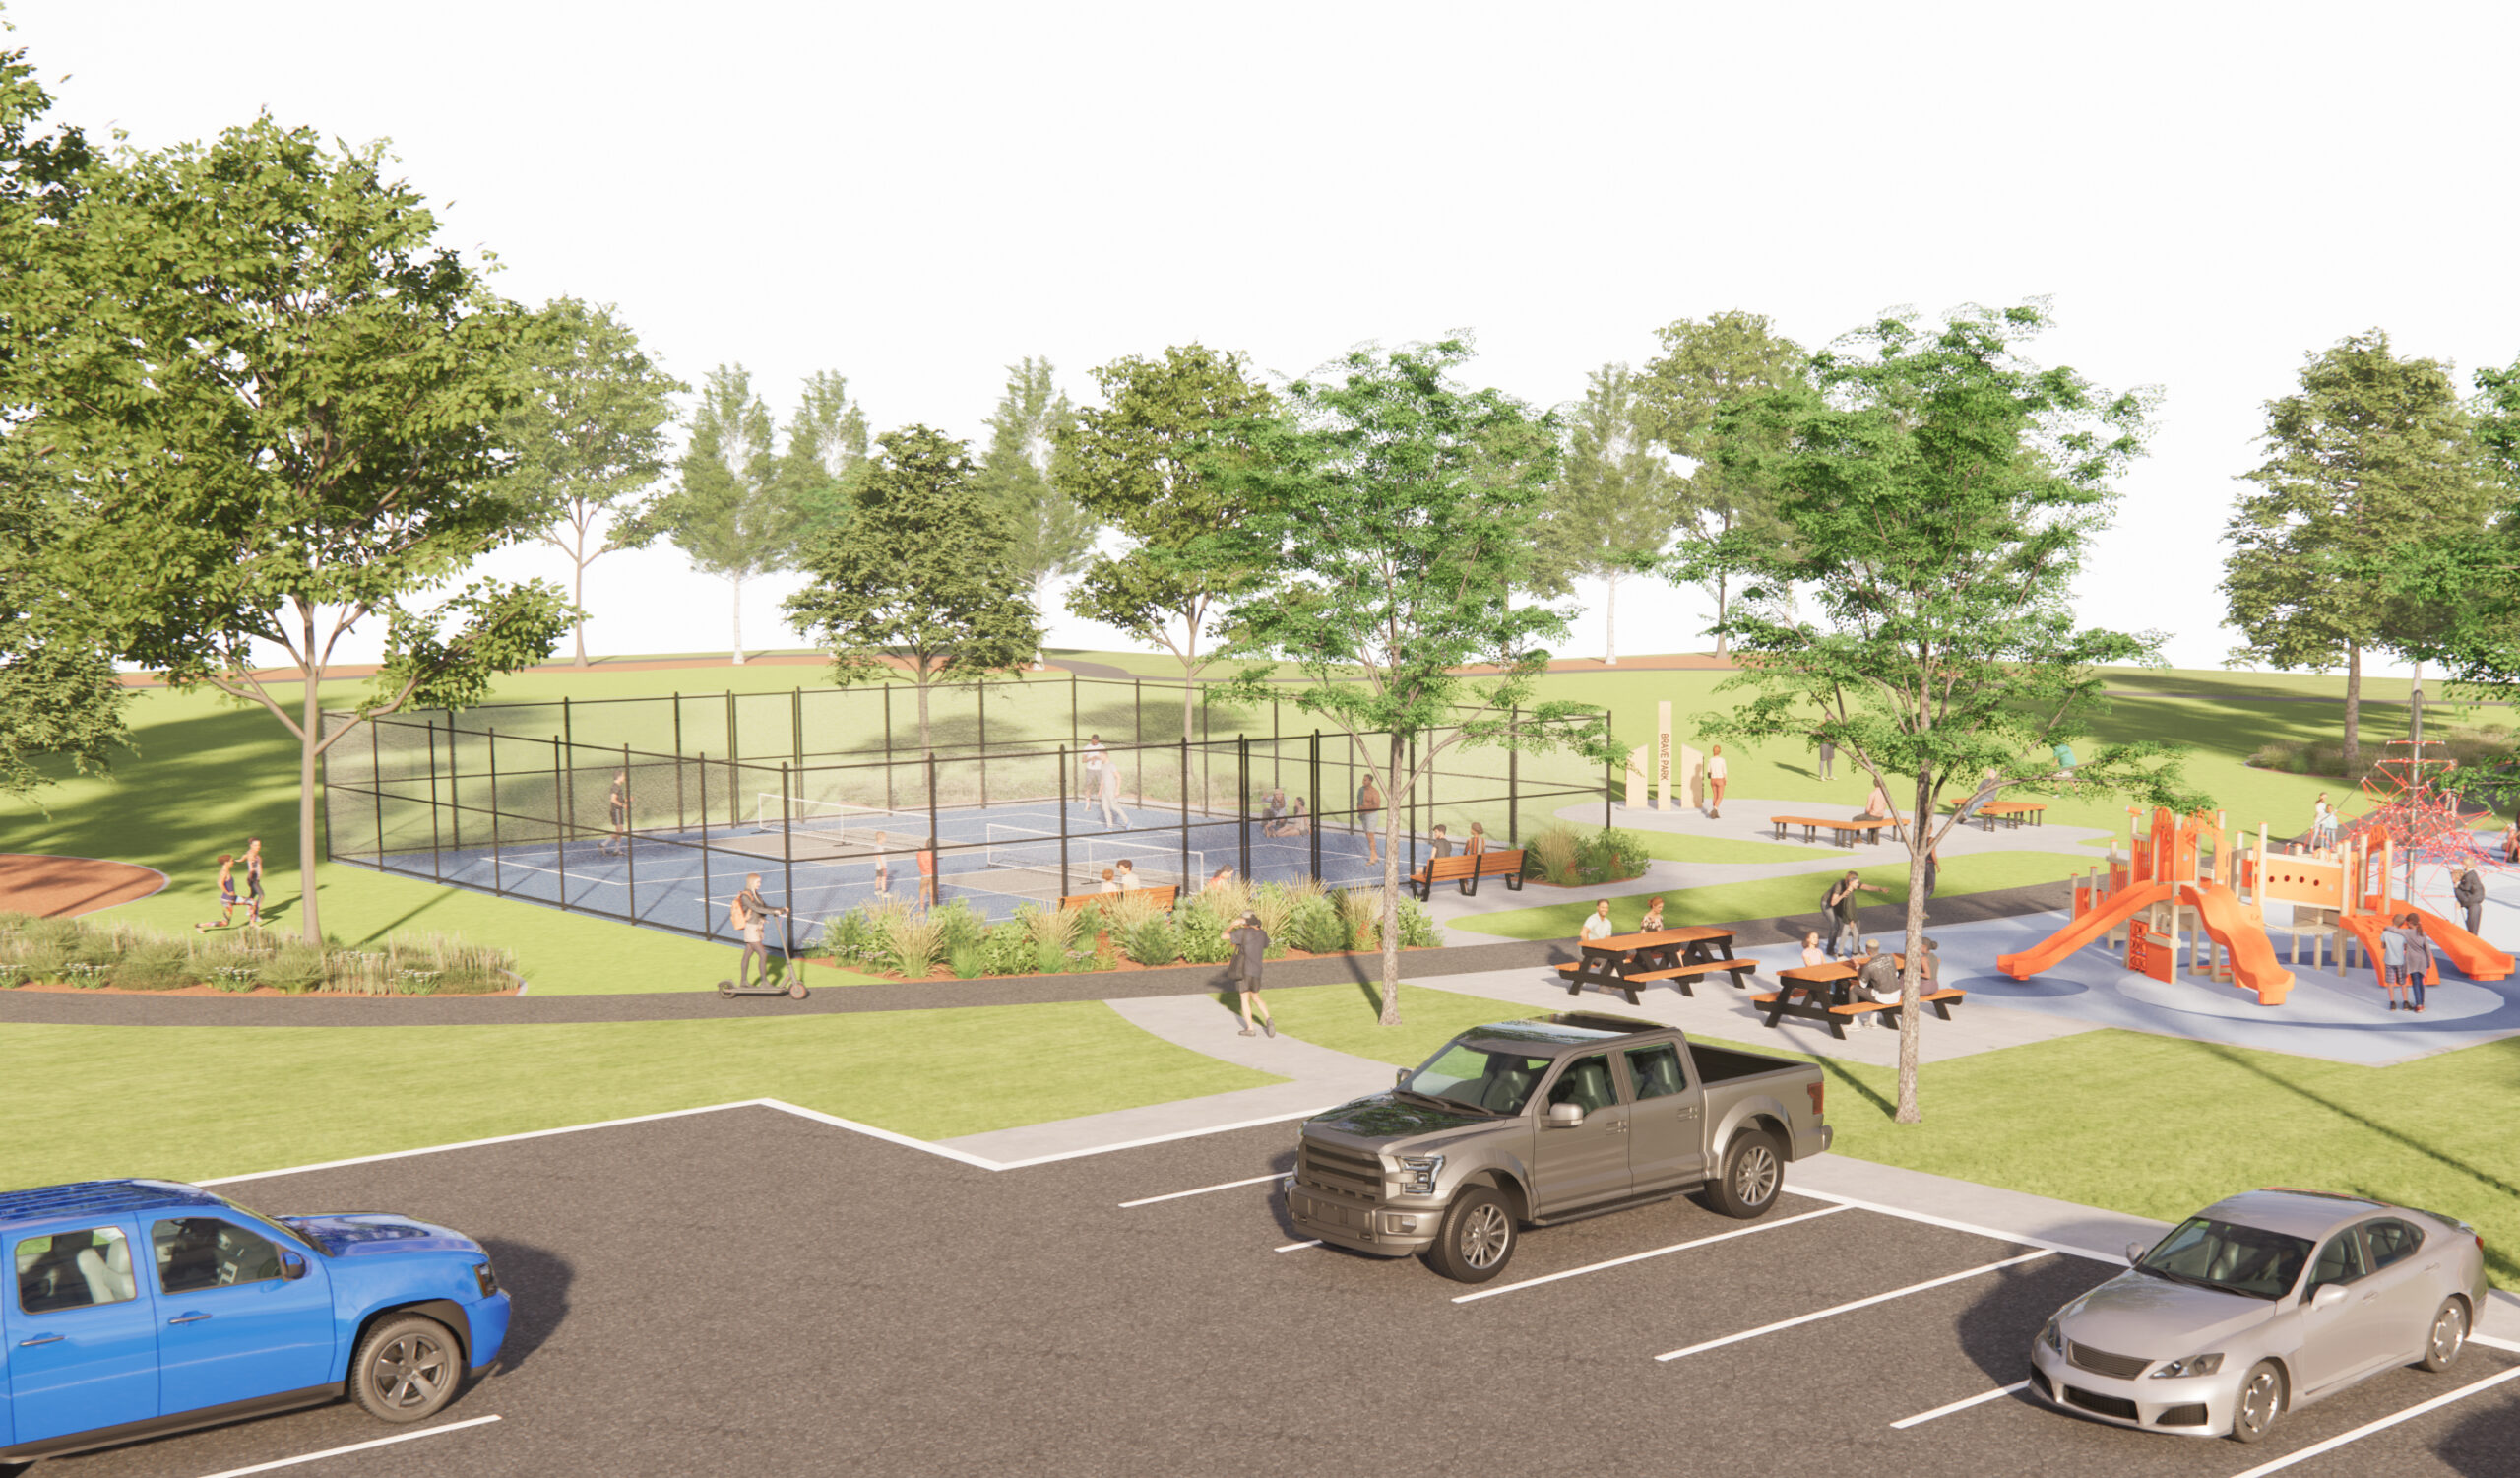 Lakewood of Strathmore to unveil Brave Park